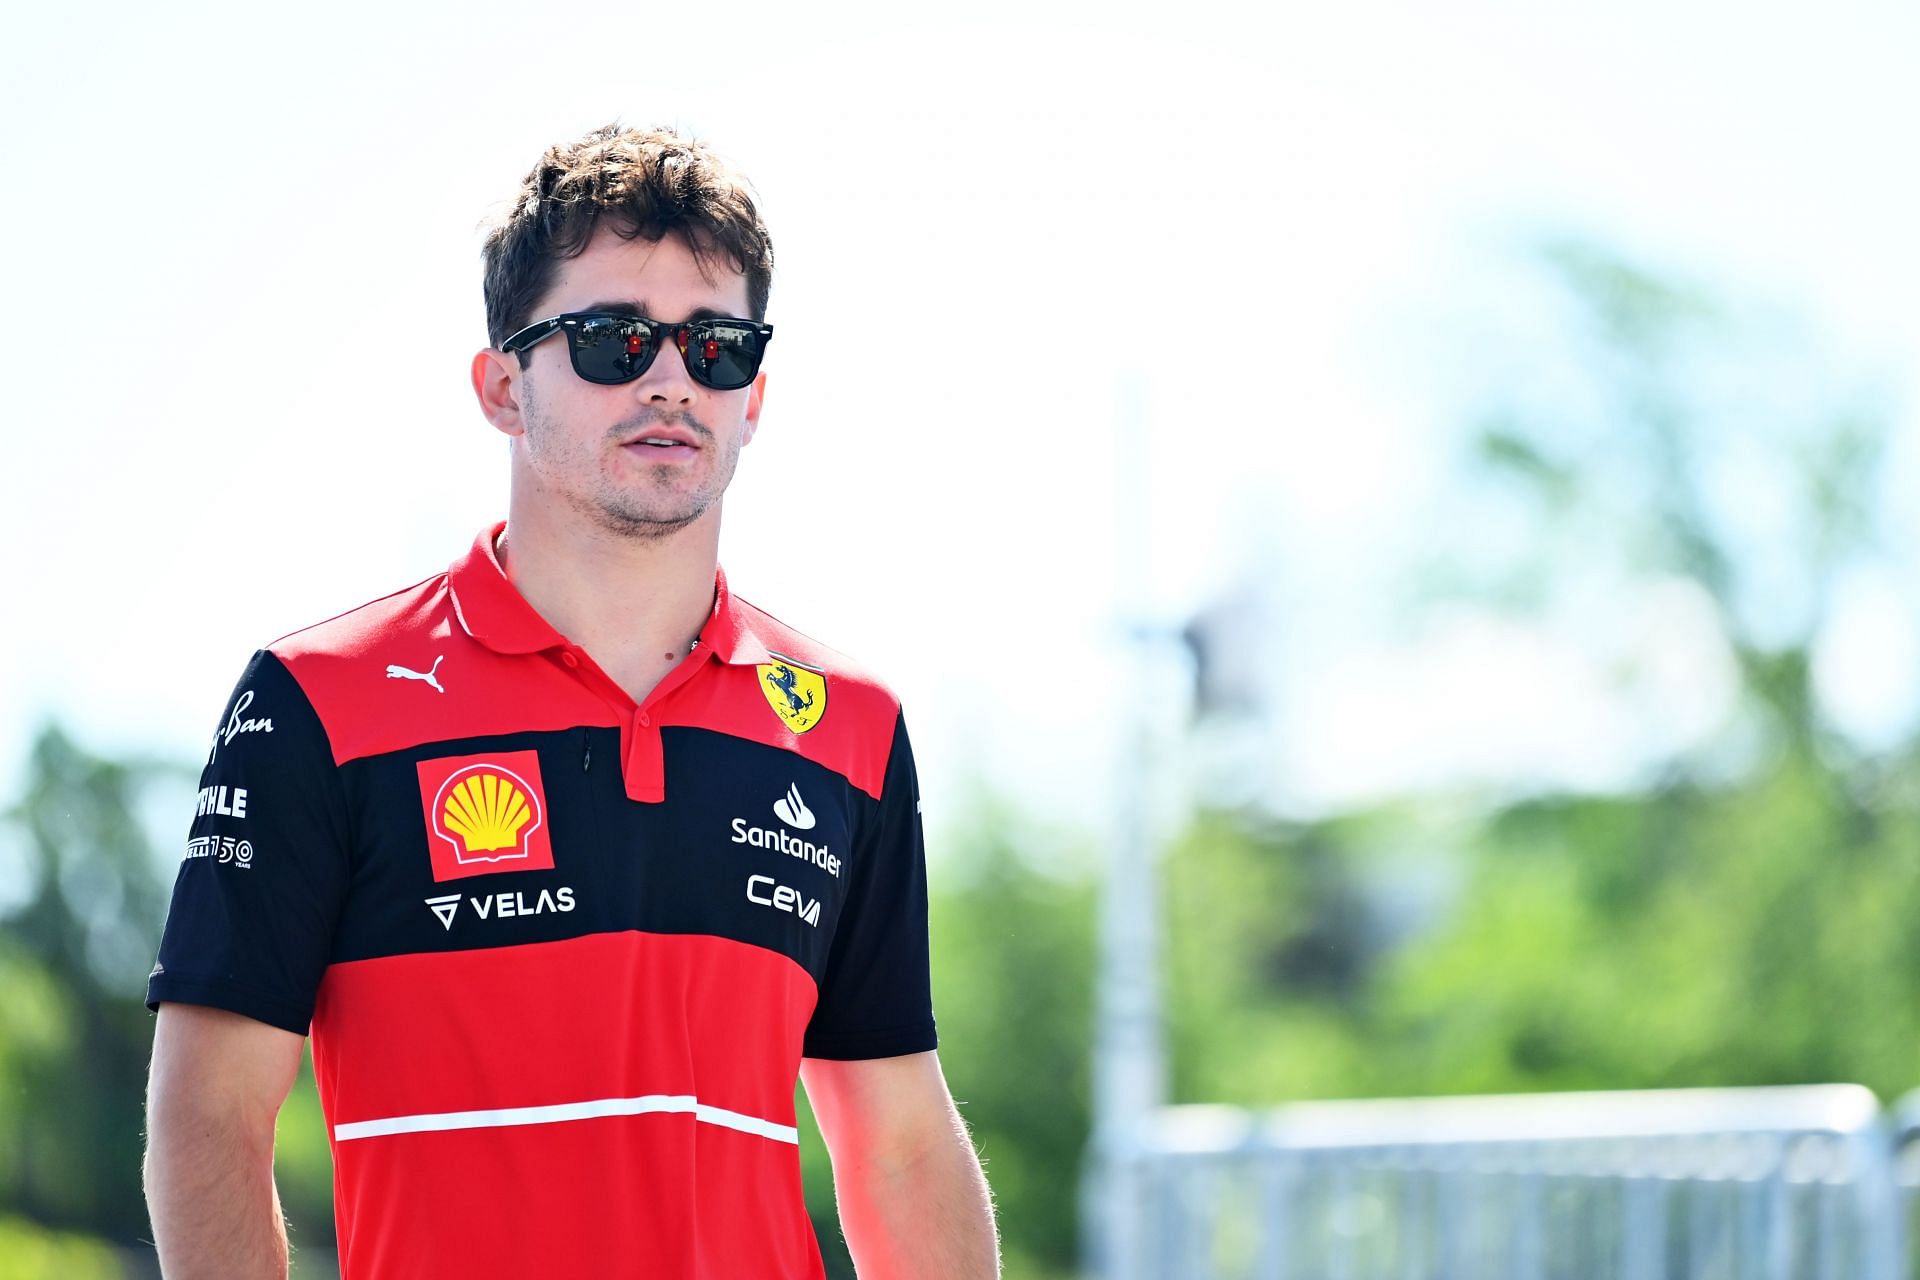 Charles Leclerc is desperate for a strong result at the 2022 F1 British GP